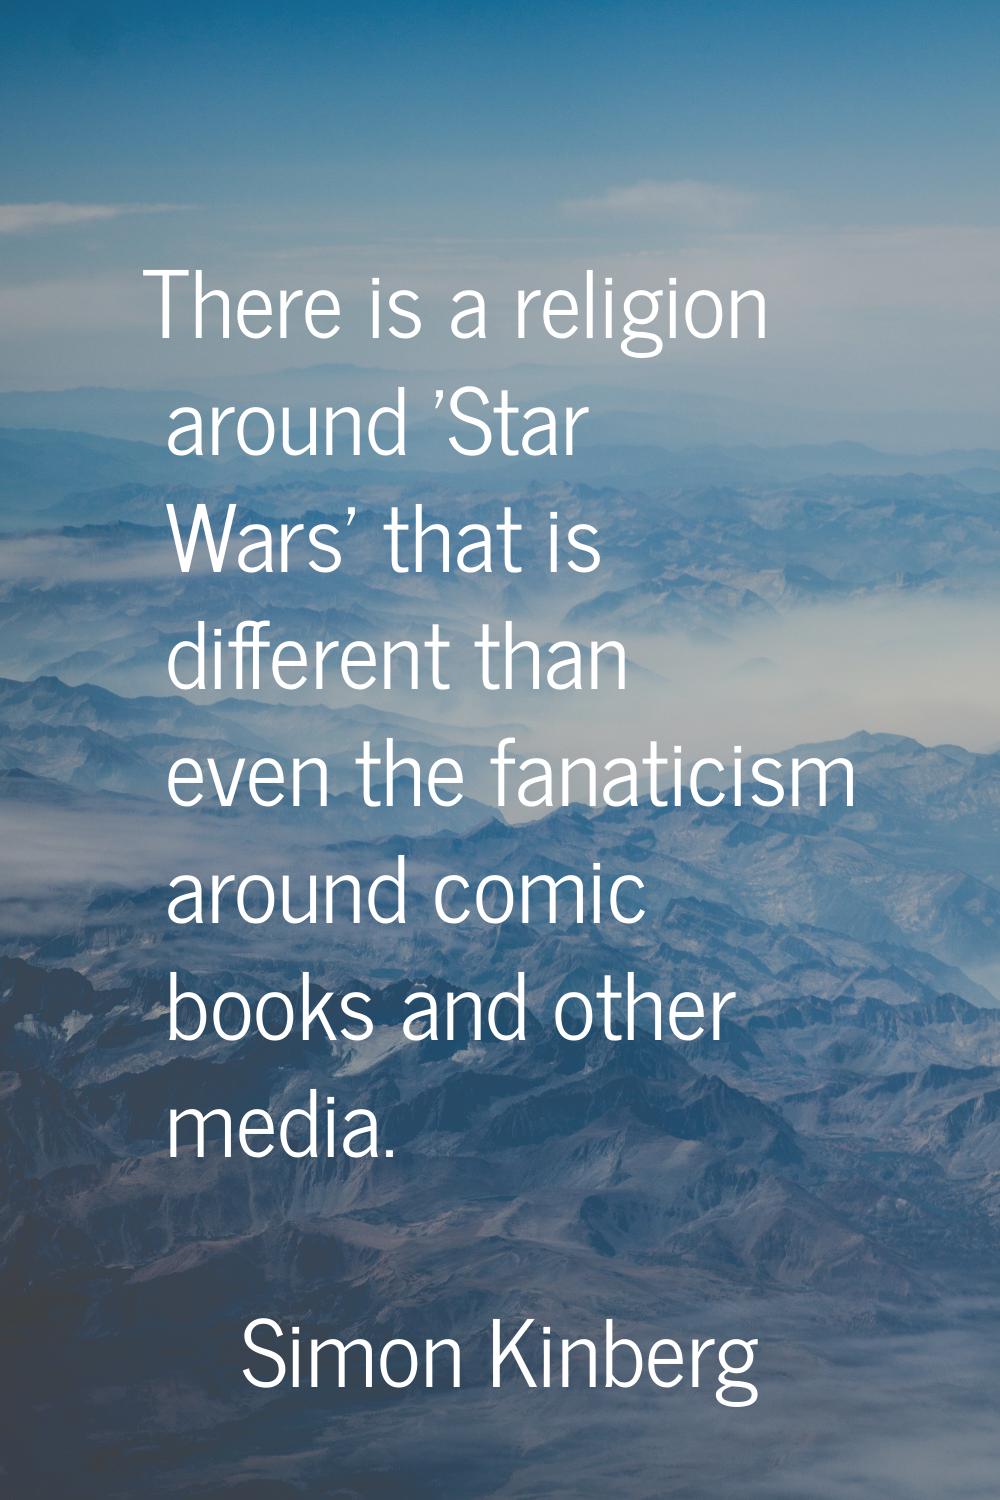 There is a religion around 'Star Wars' that is different than even the fanaticism around comic book